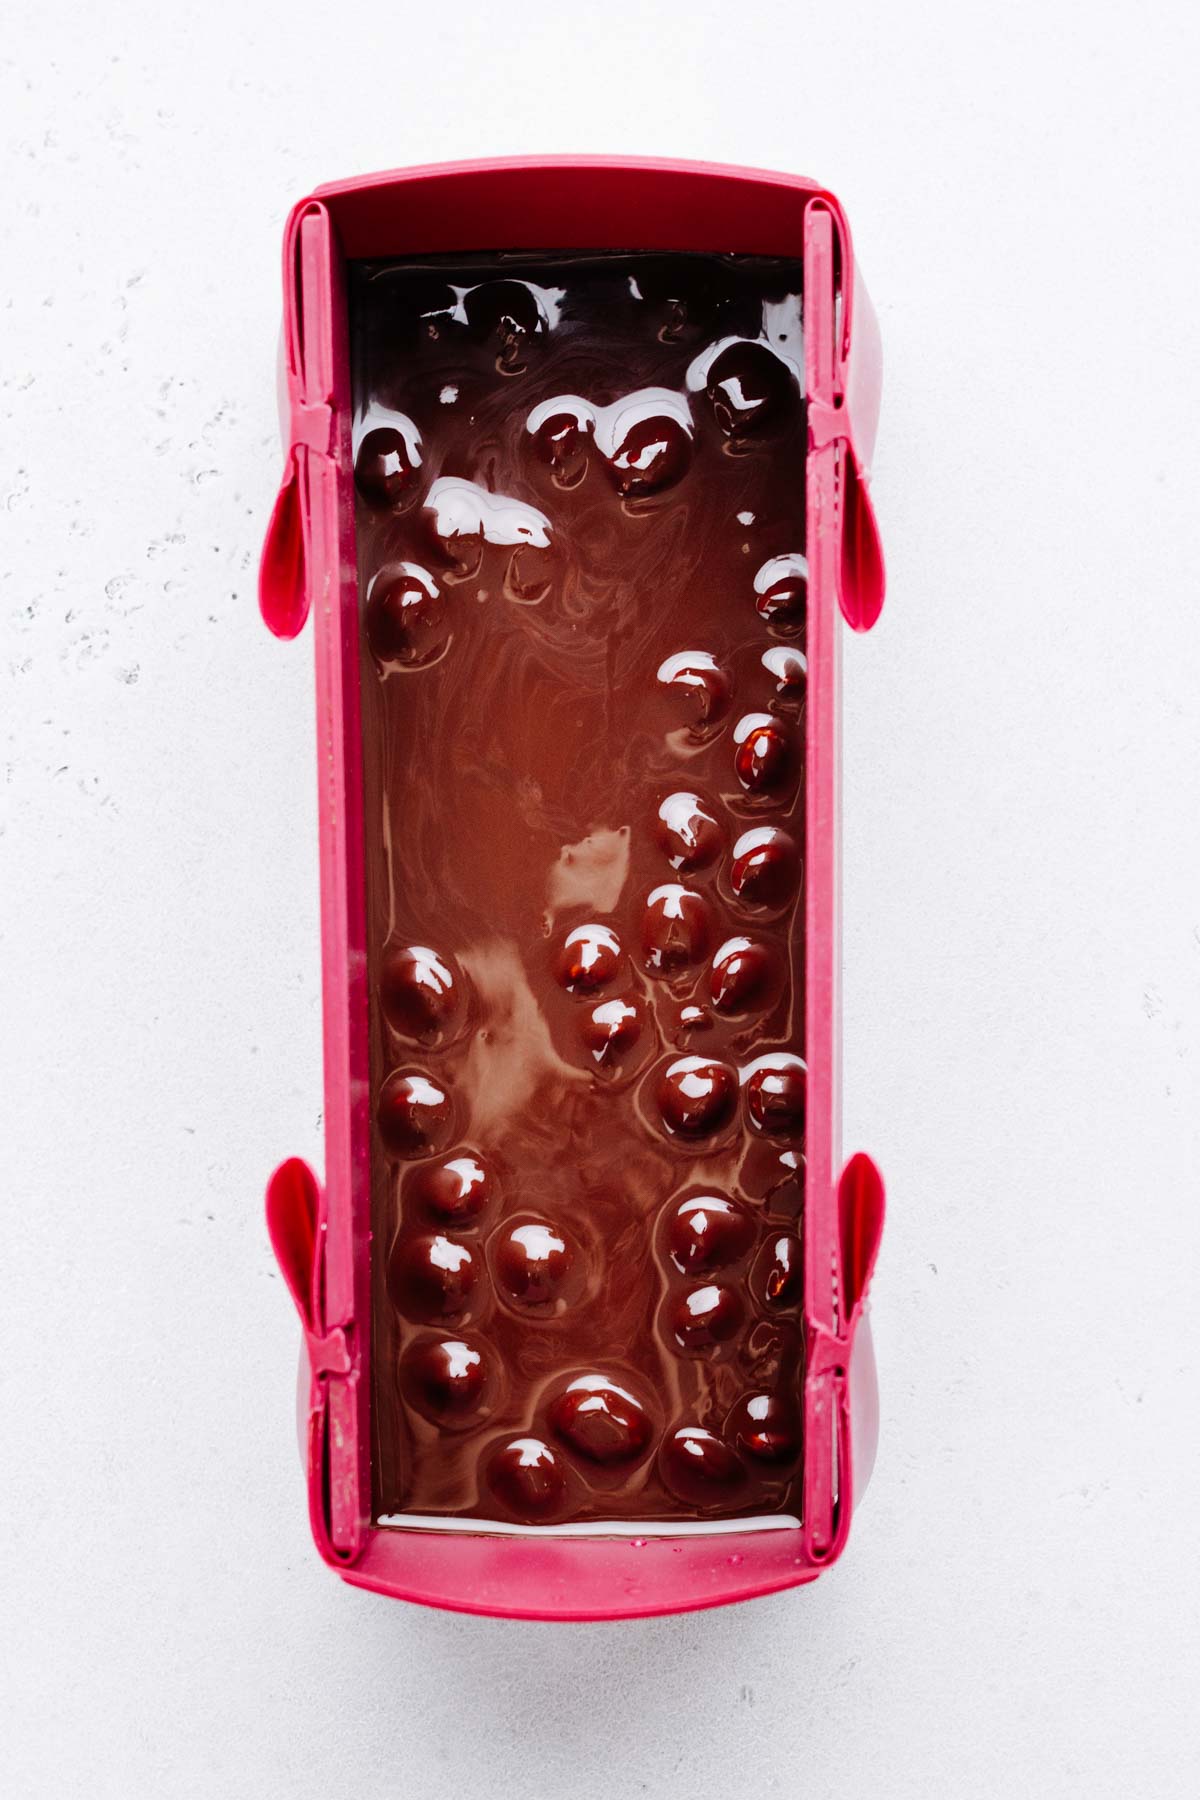 a burgundy colored silicone loaf pan with melted chocolate and hazelnuts in it on a white marble backdrop.